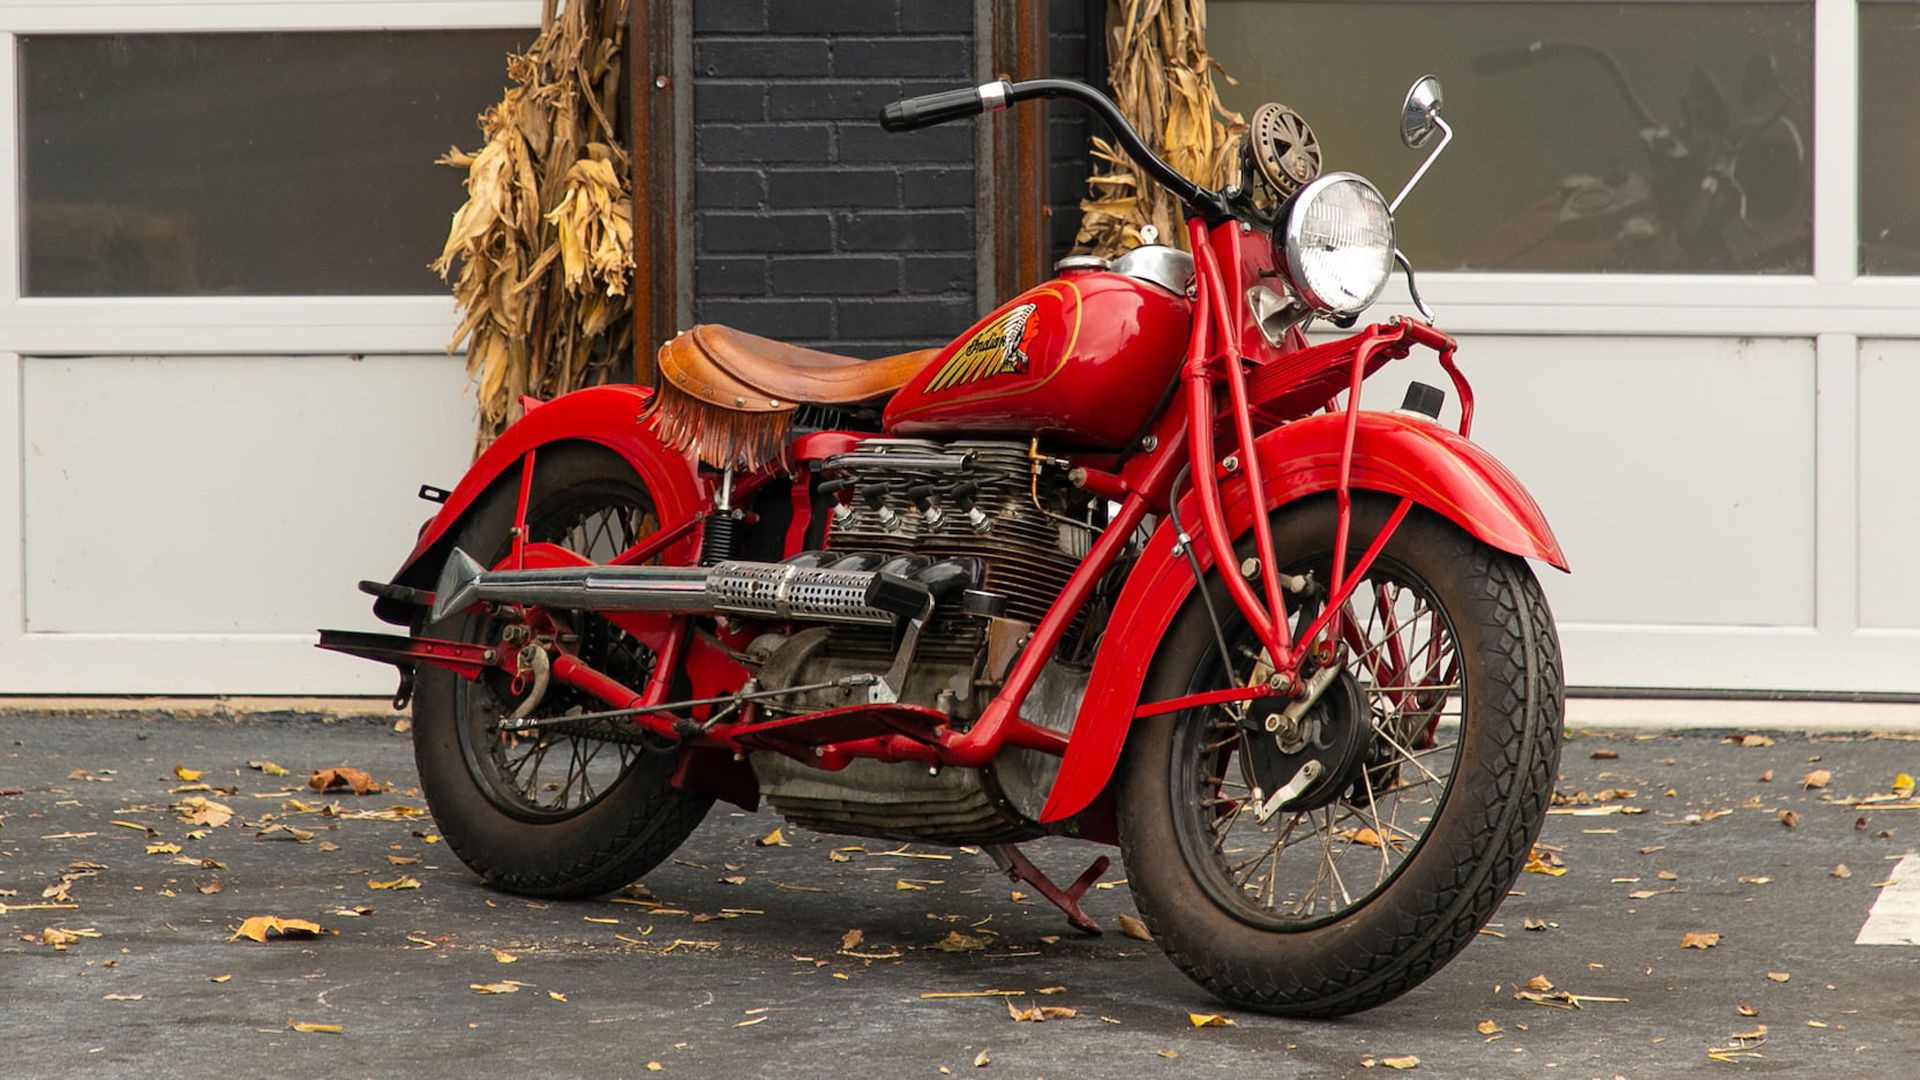 1939 Indian 402 classic vintage motorcycle